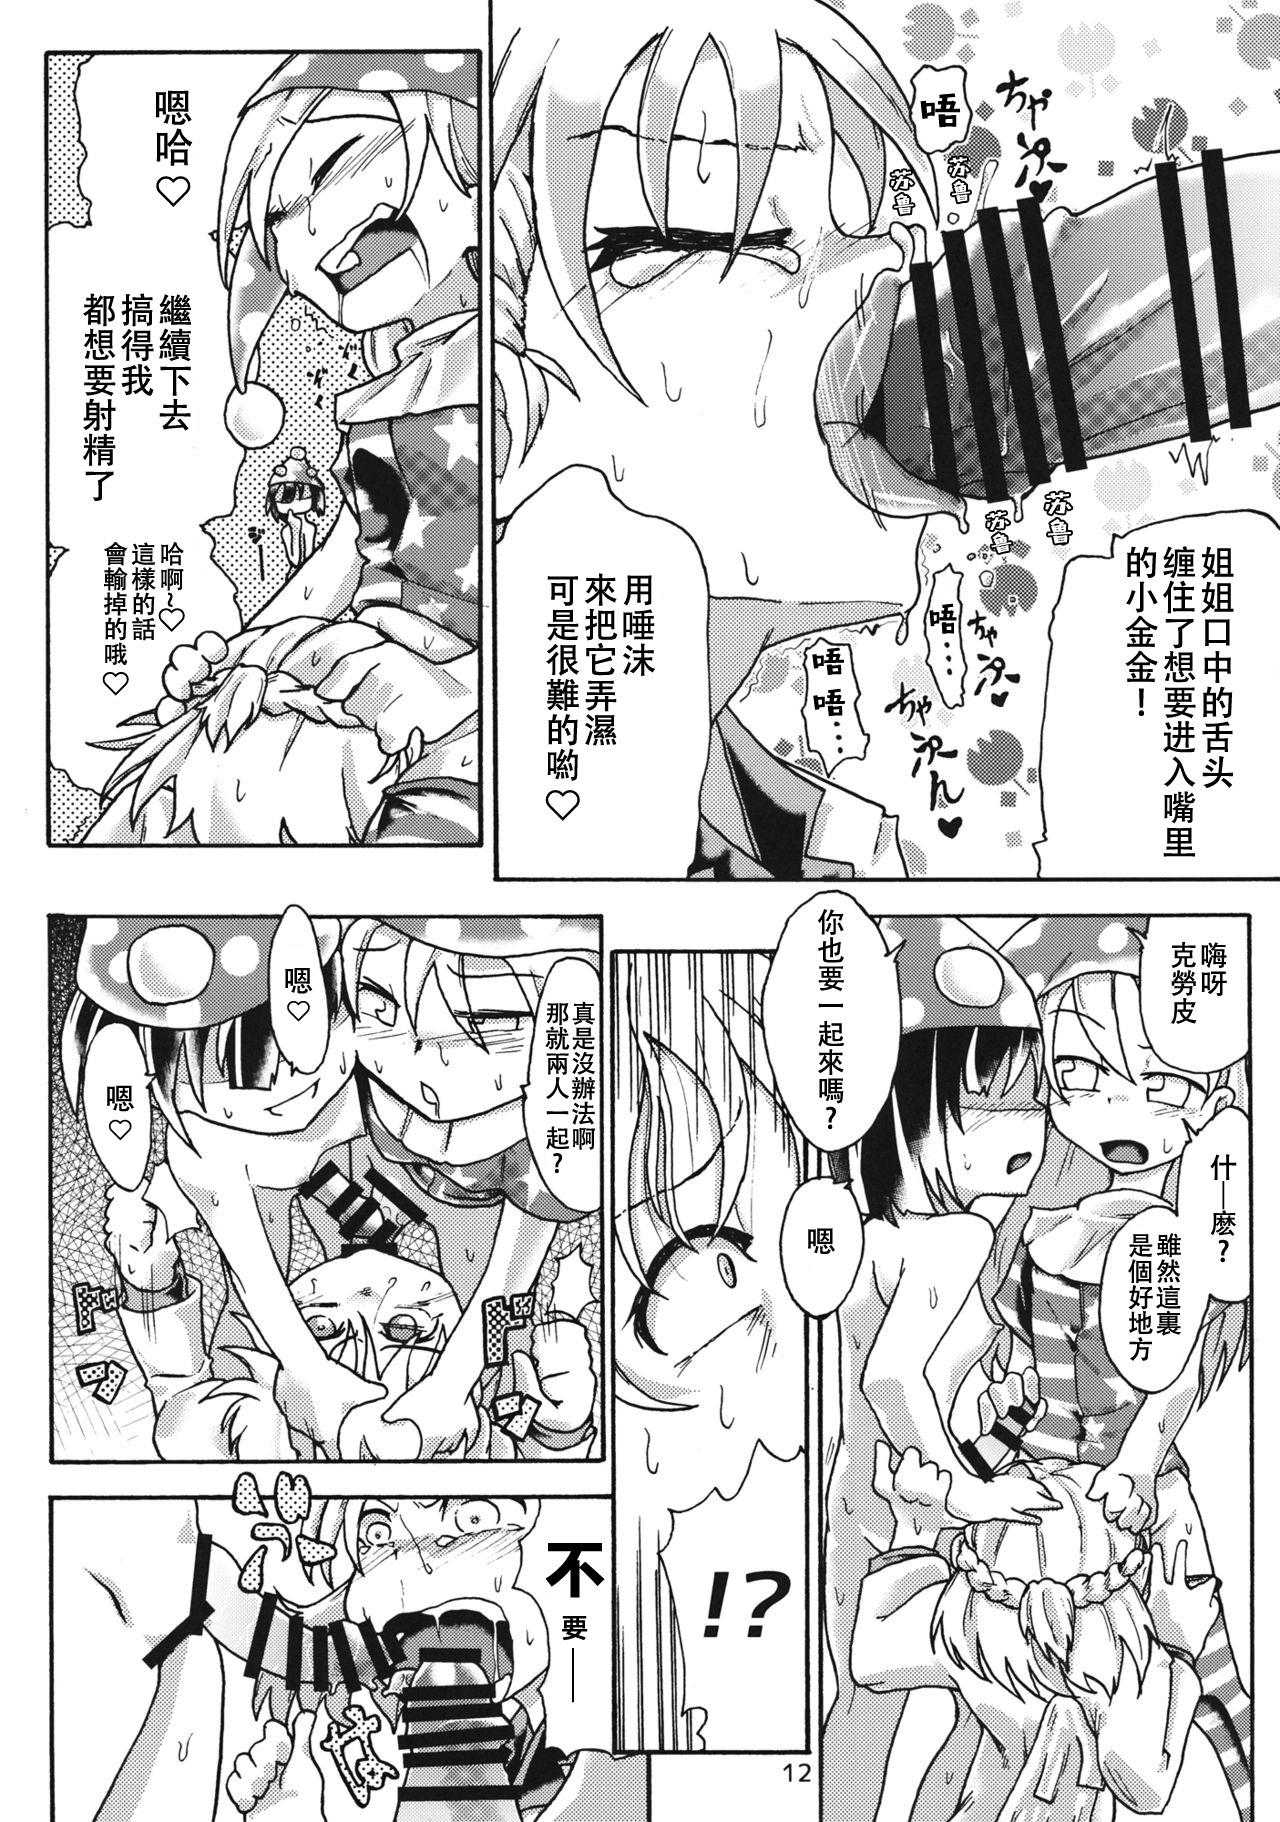 Blow Job Porn Creeping! - Touhou project Amature Sex - Page 11